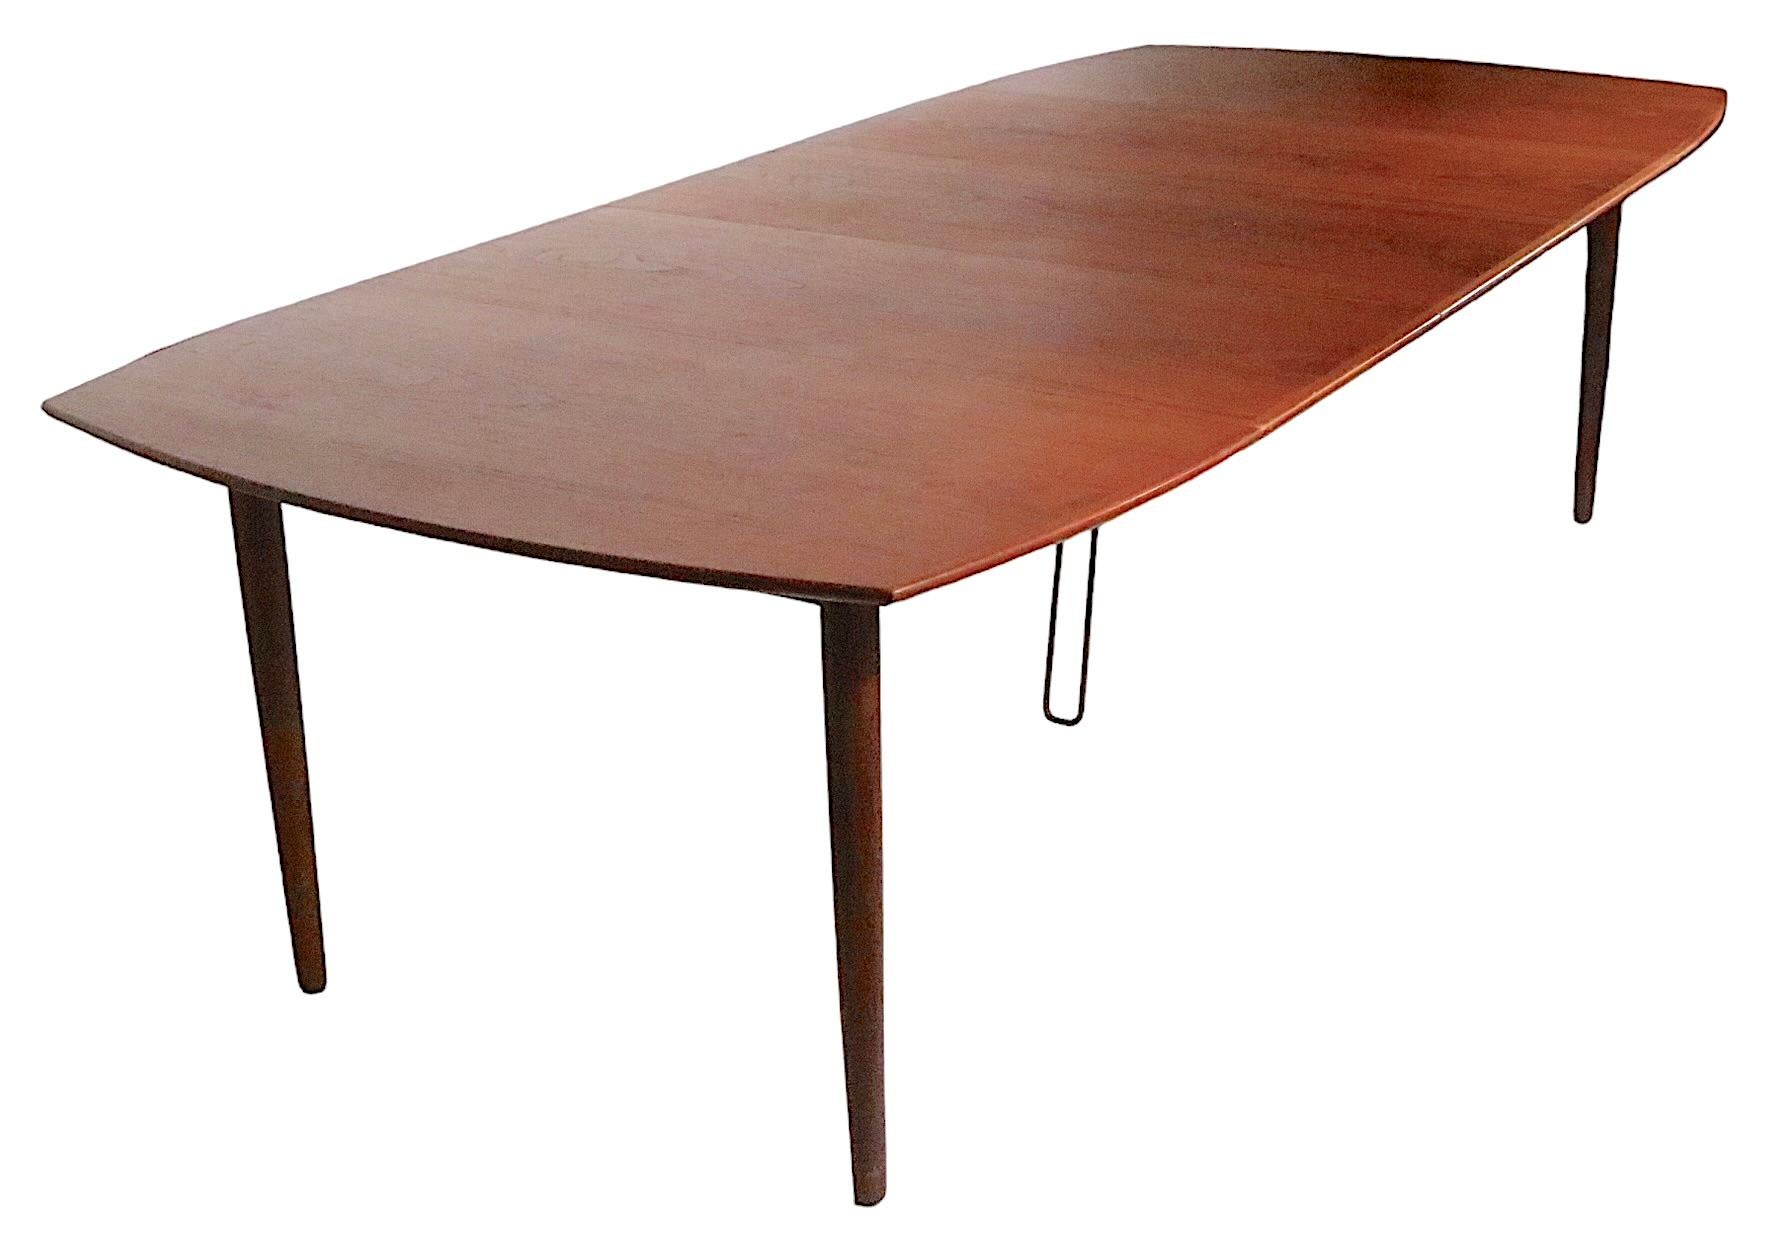 Danish Mid Century Modern Teak Extension  Dining Table by H W Klein  c 1950's For Sale 5